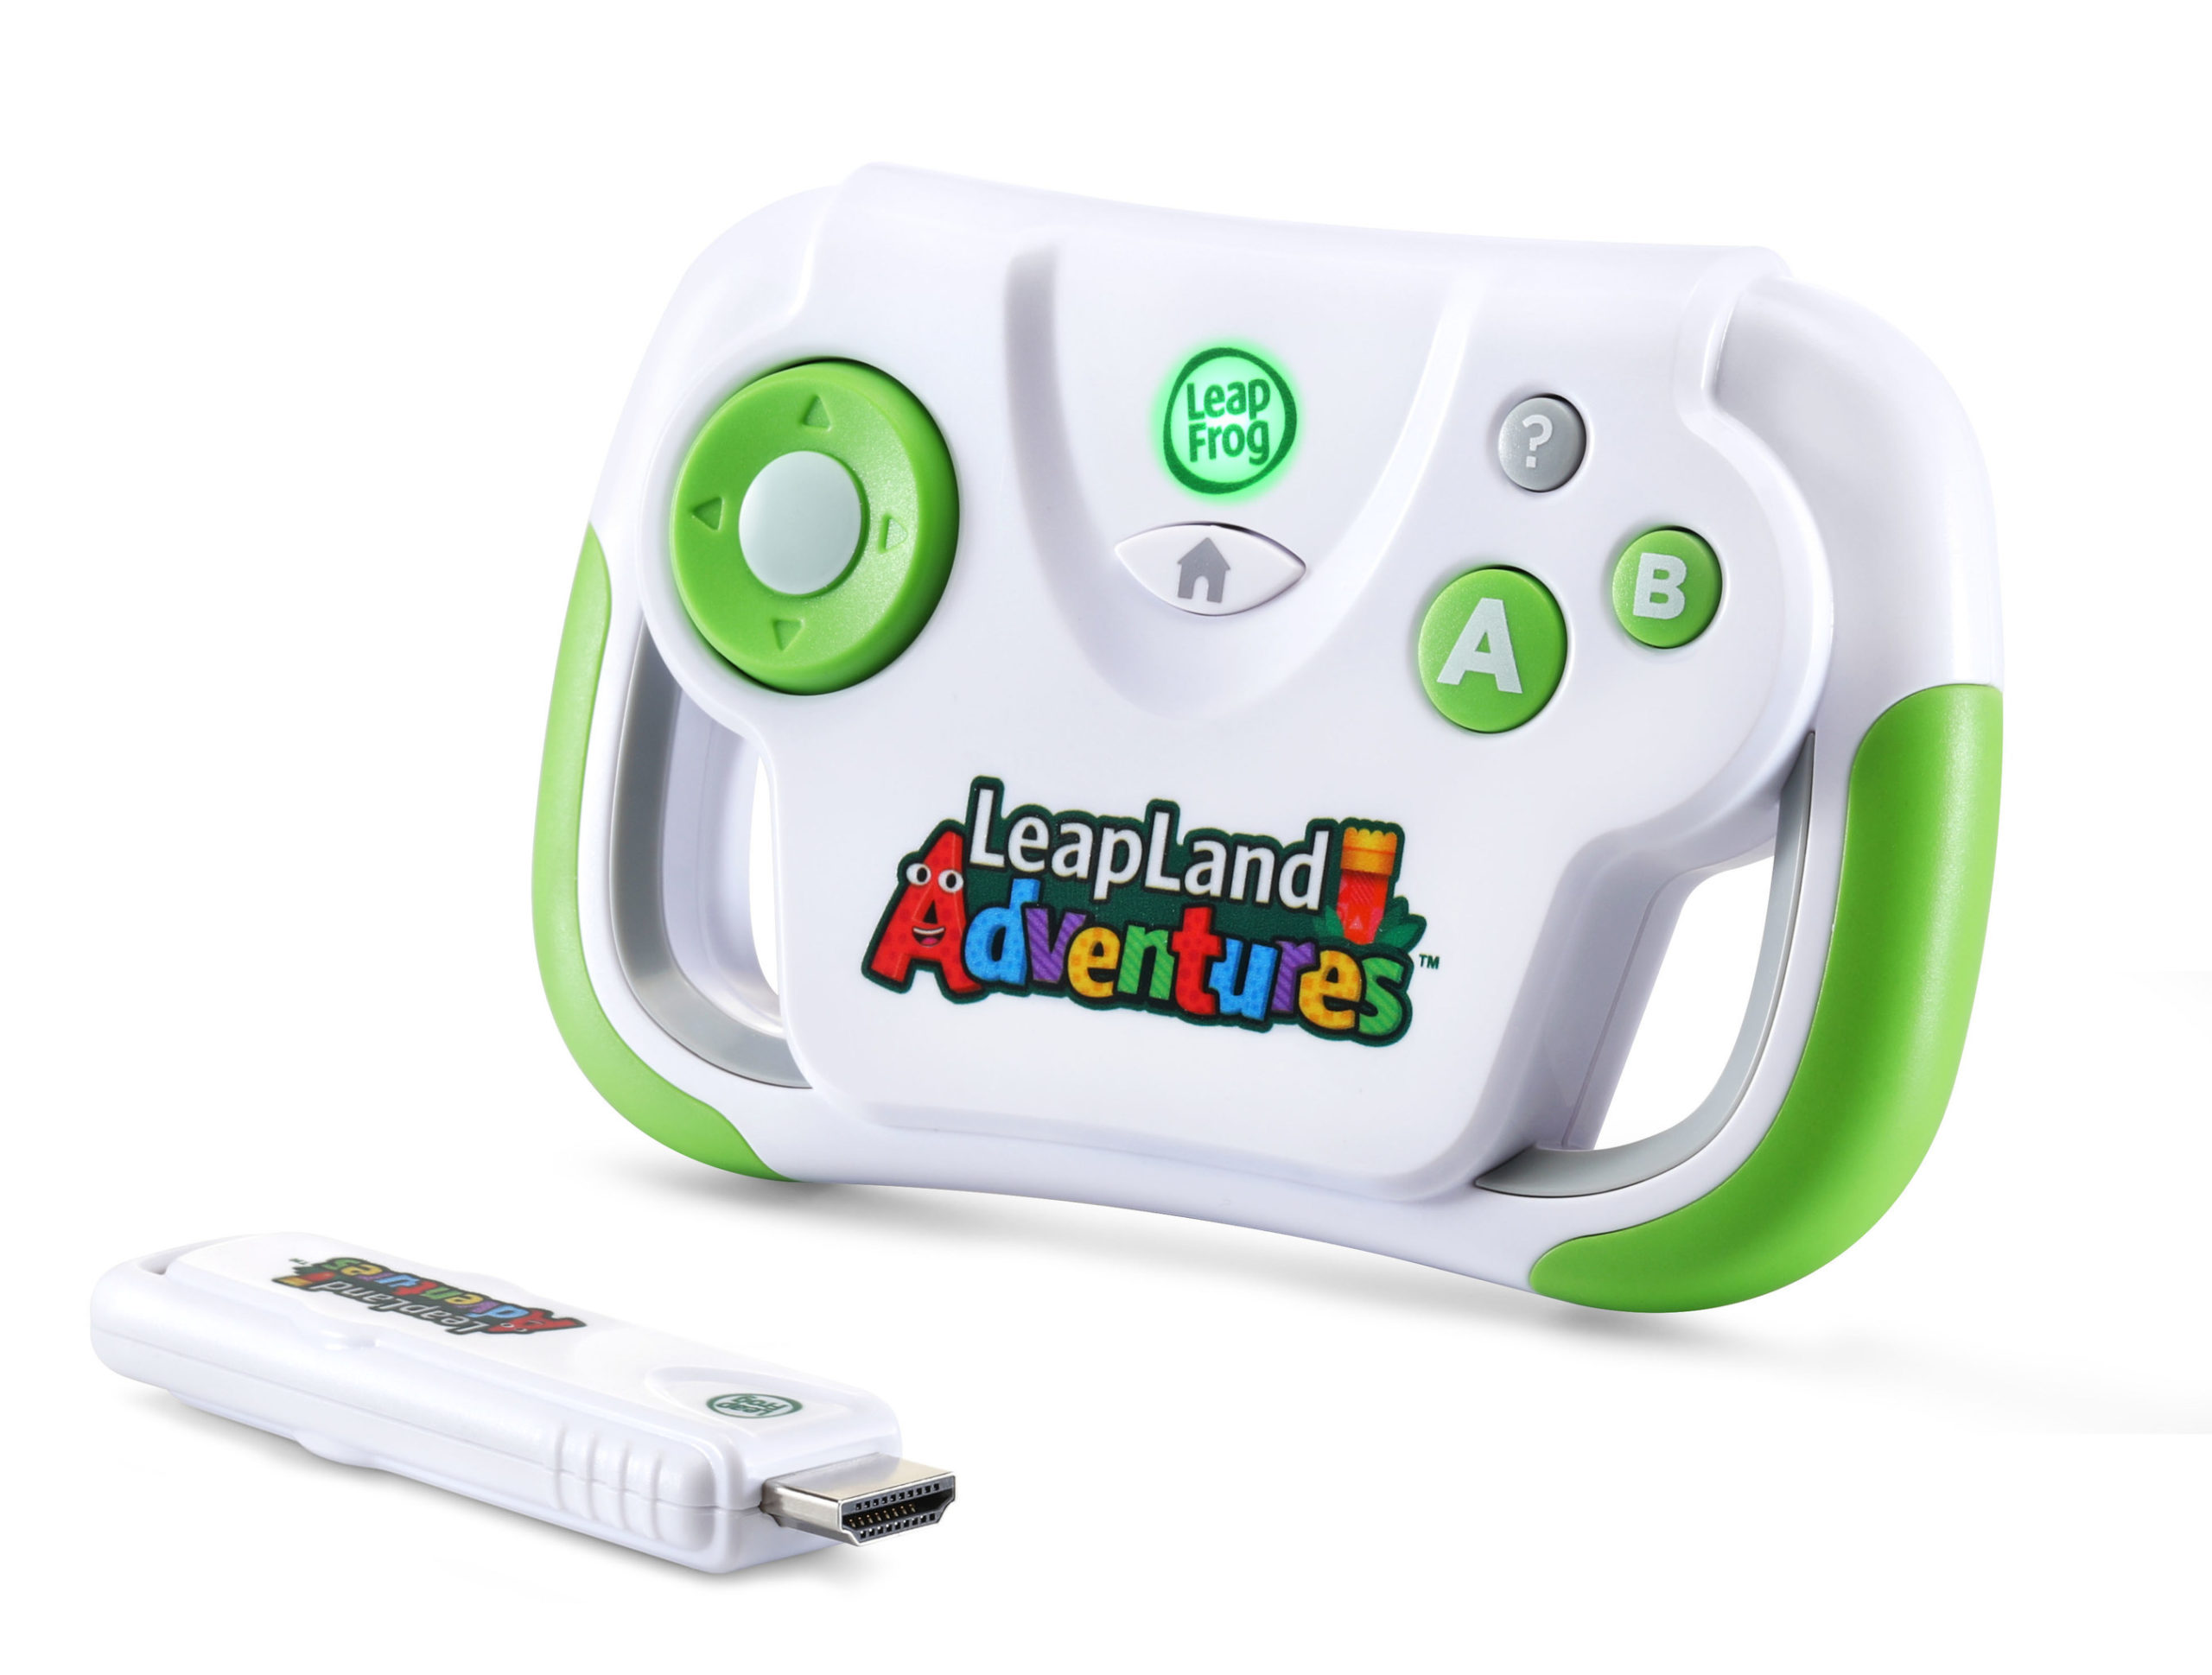 LeapLand Adventures is a plug-and-play game system for preschoolers